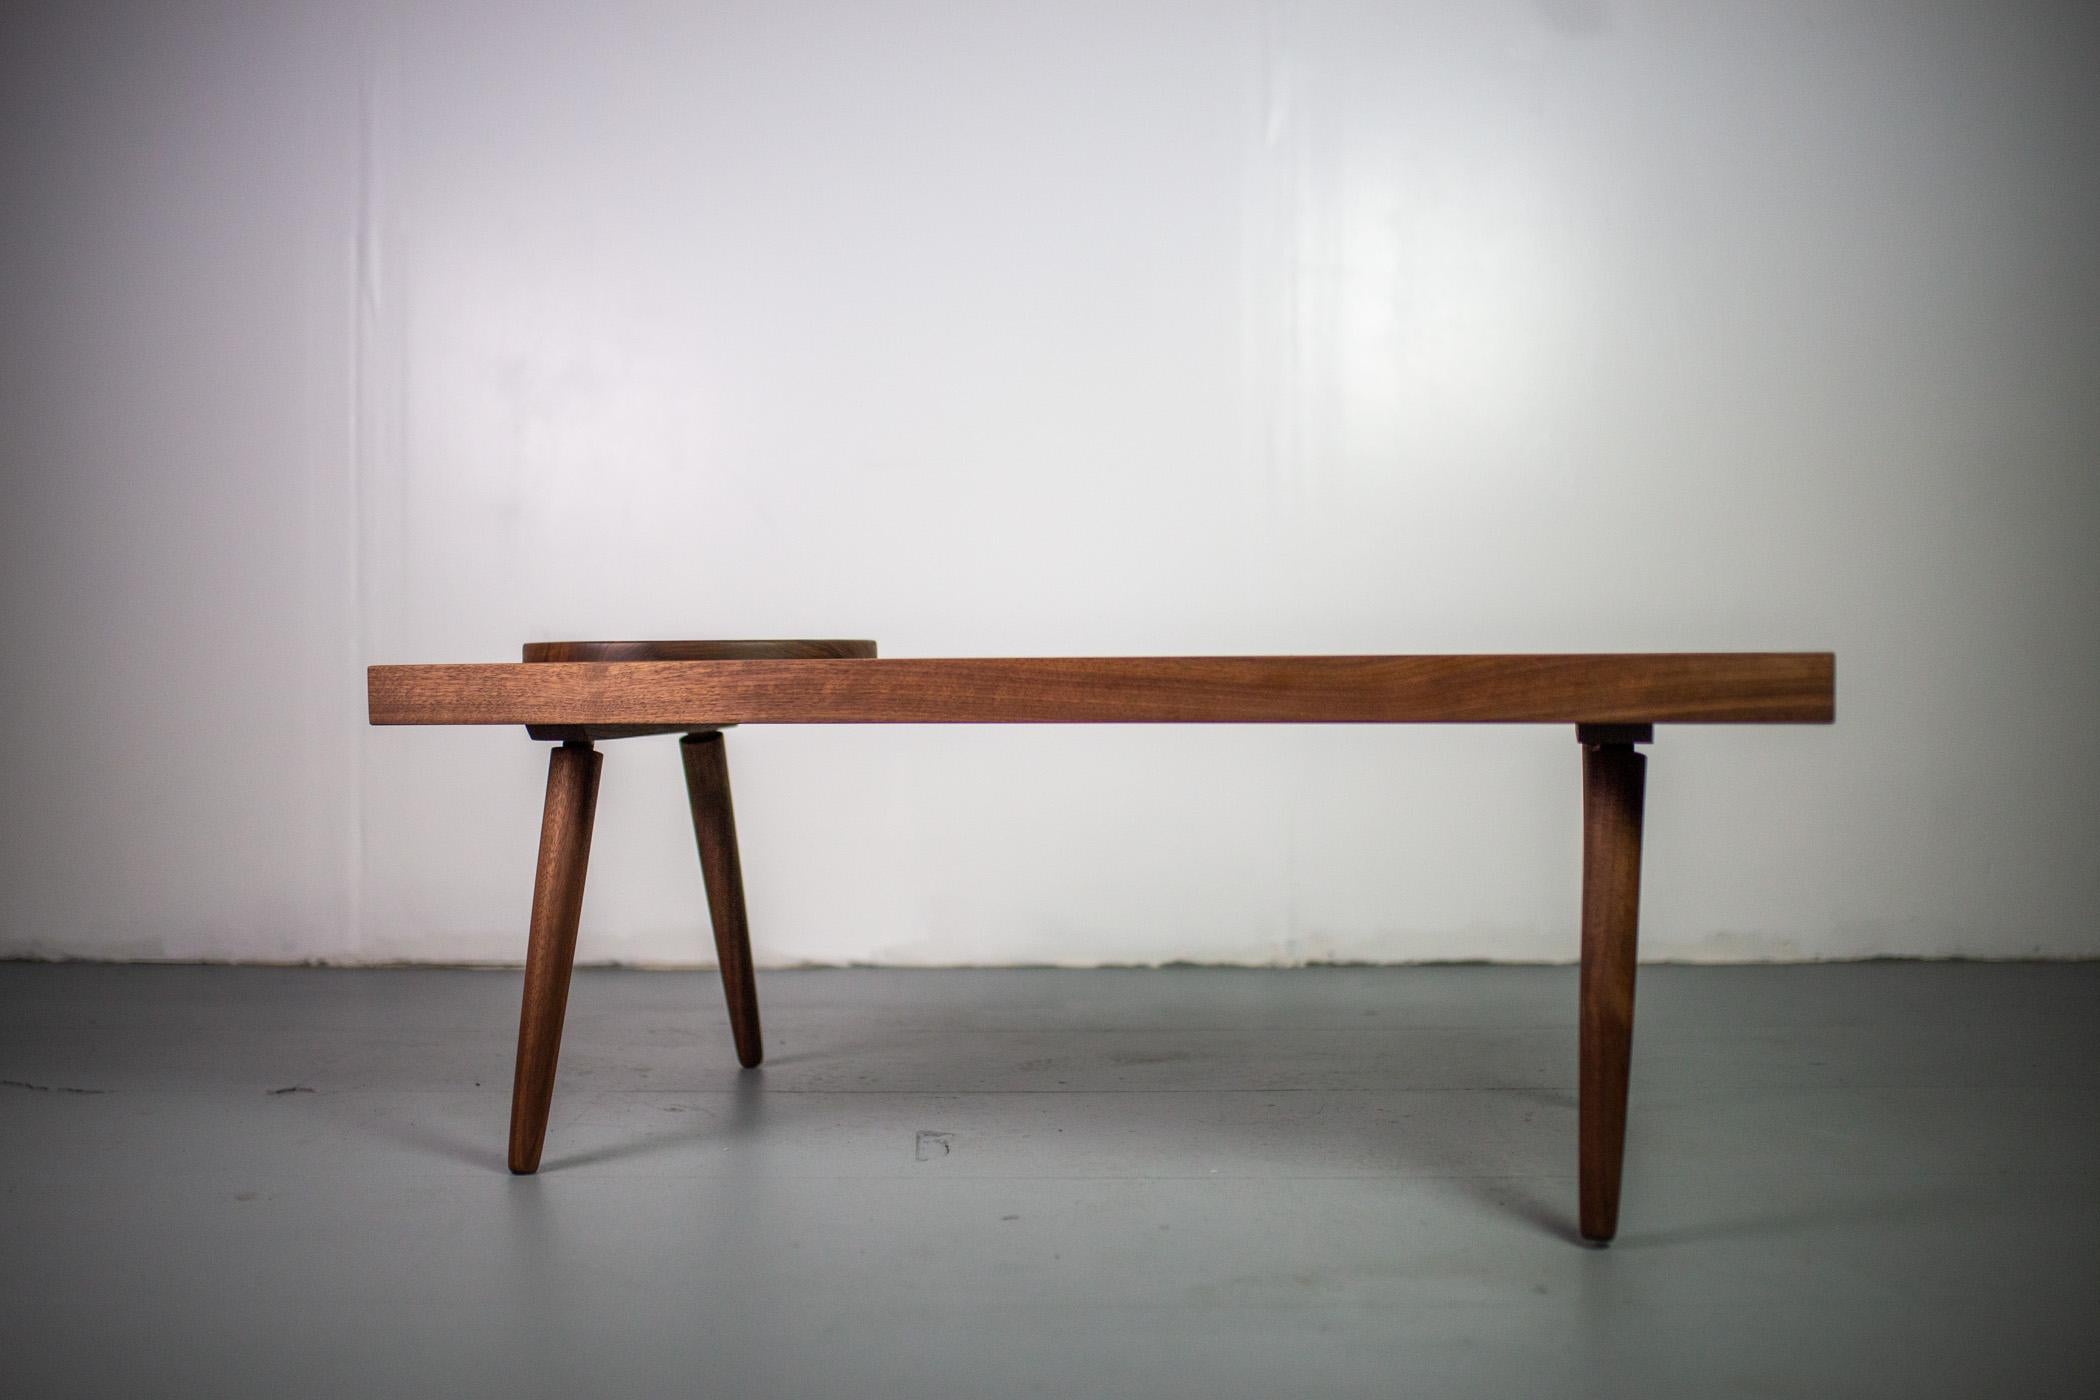 Studio Catch it all bench or coffee table by Michael Rozell USA 2020 in figured walnut.